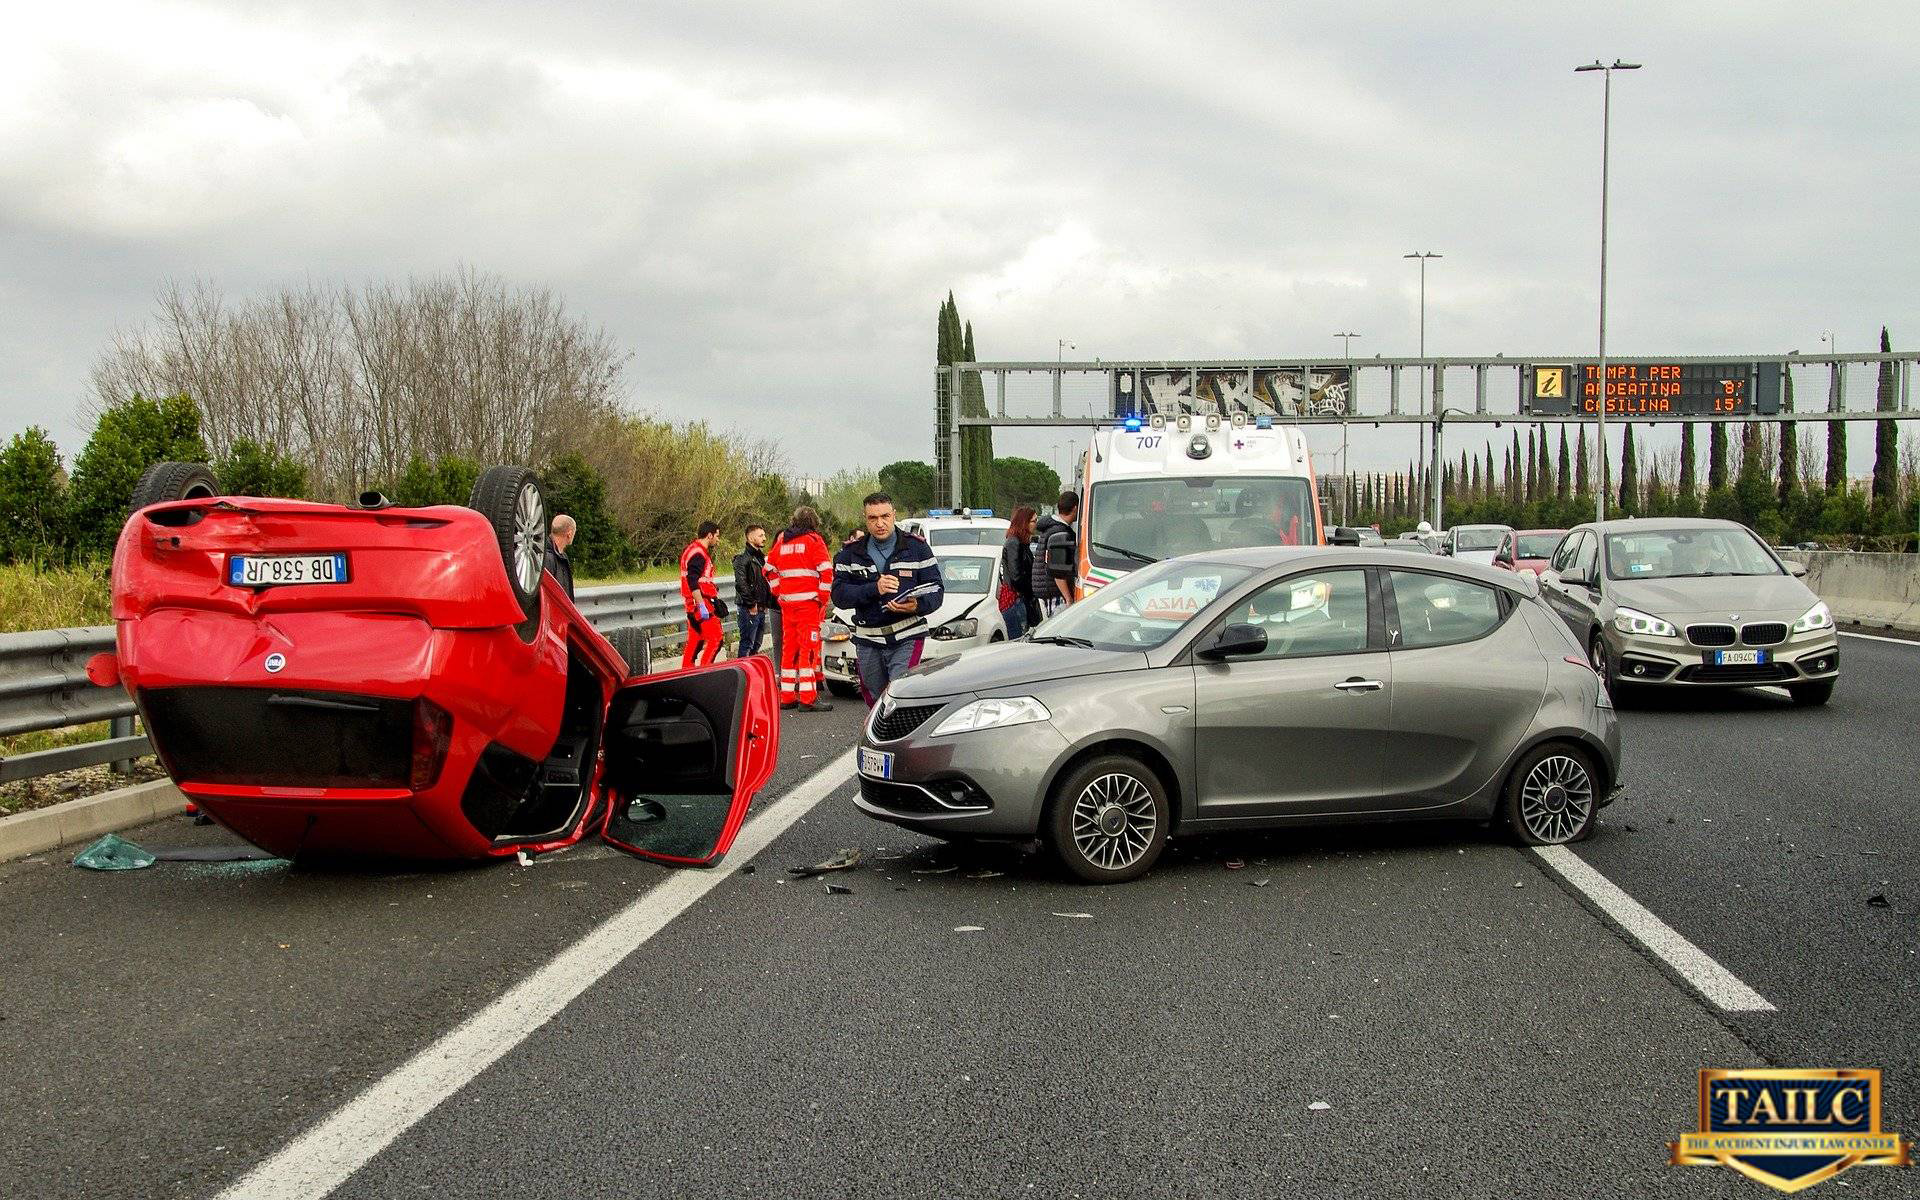 fast cars result in big injuries or even death